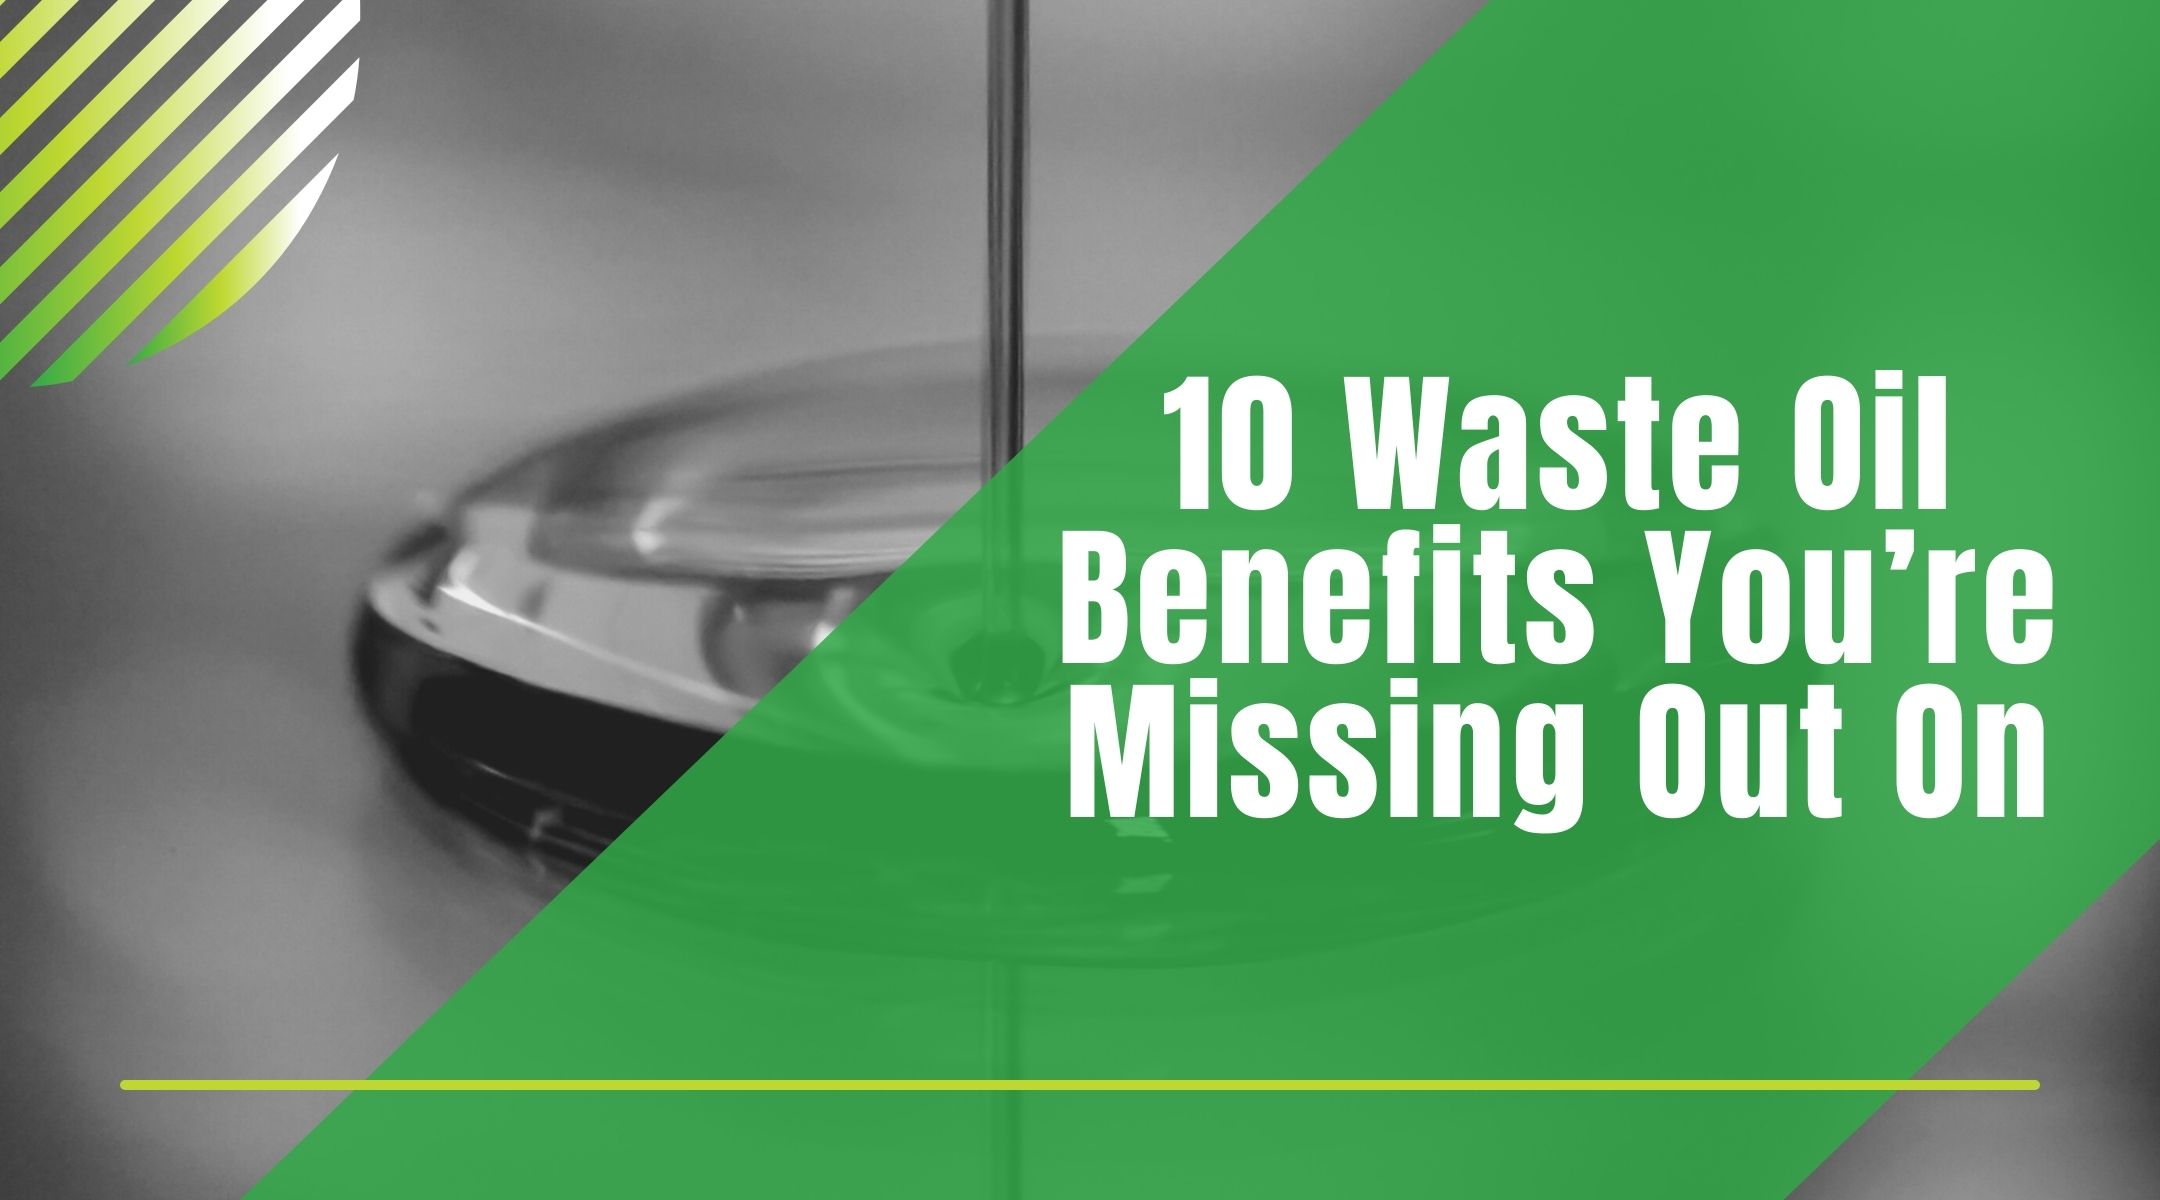 10 Waste Oil Benefits You’re Missing Out On